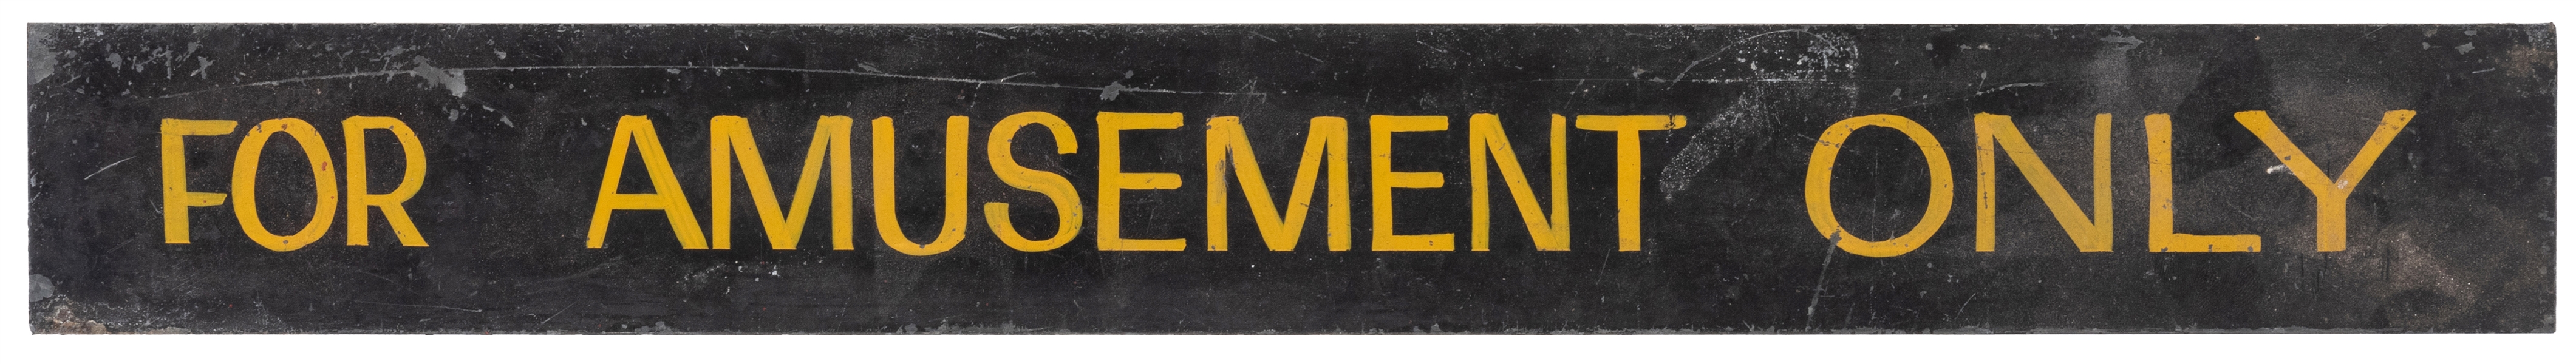  For Amusement Only Sign. 20th century. A painted black and ...